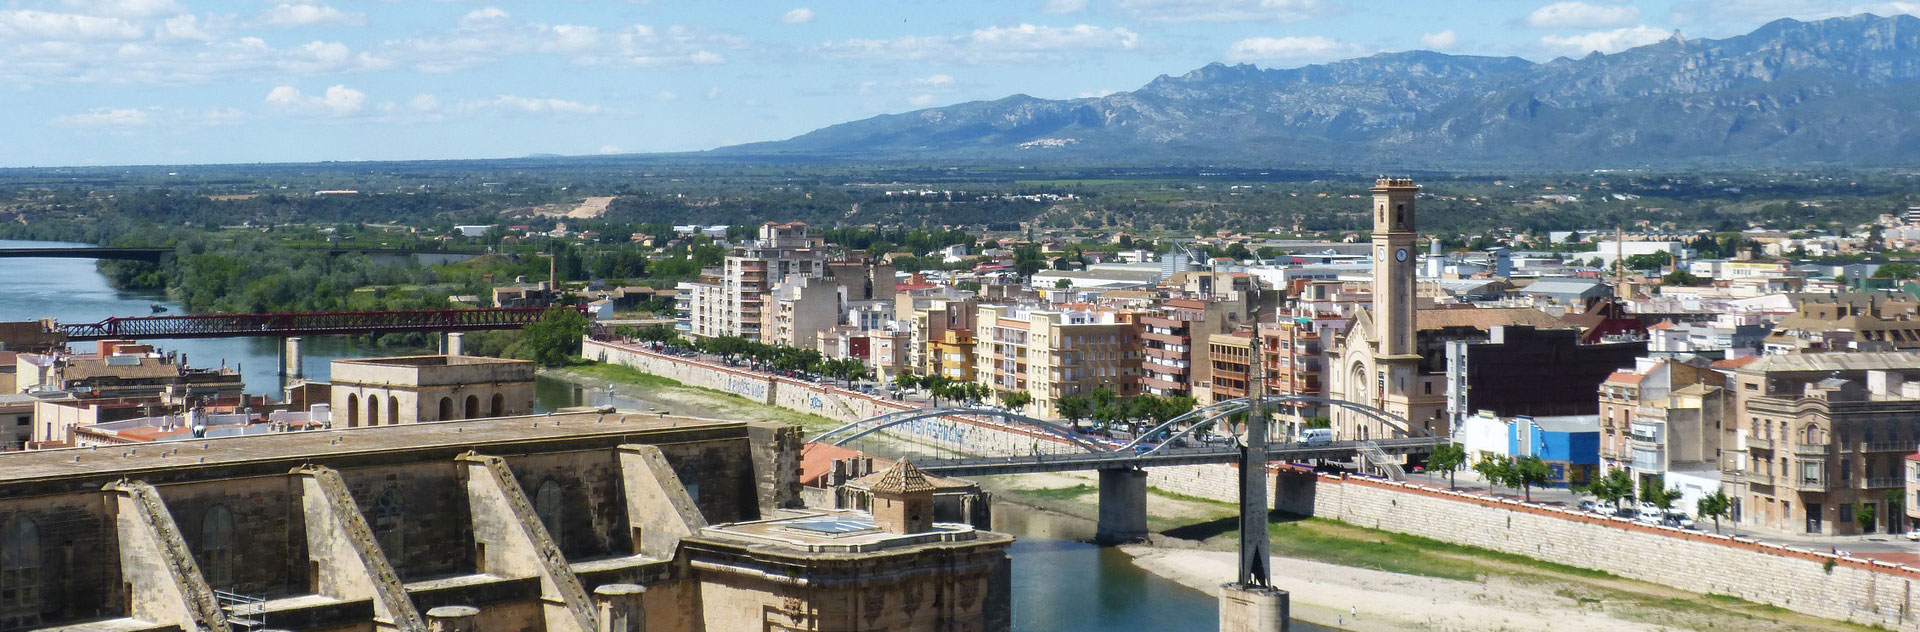 Real Estate Rieres for sale and rental of apartments, houses, townhouses, Tortosa. Rental of houses and flats in Tortosa. Buy flats in Tortosa. Homes for sale in Tortosa.